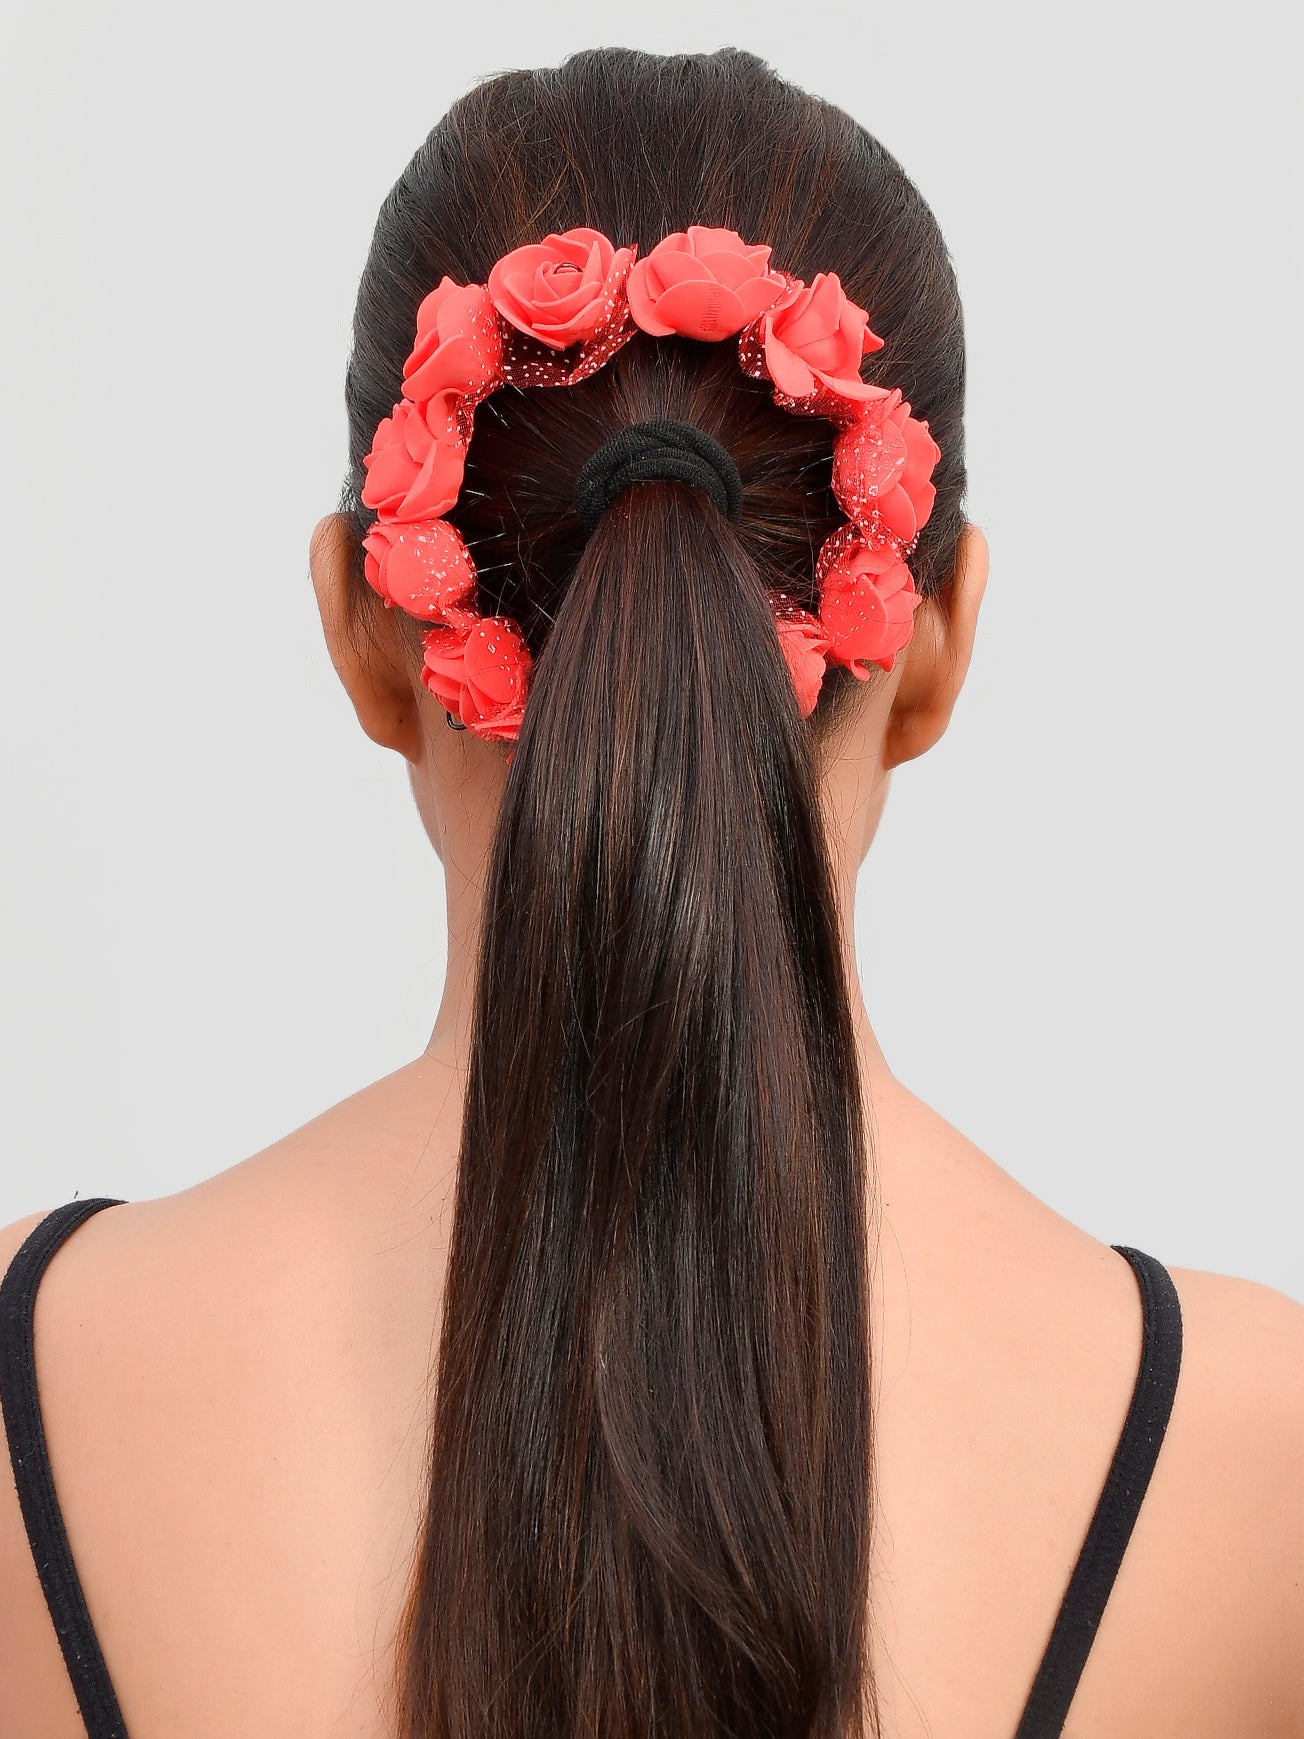 Set of 10 Red Flower Hair Accessory Set